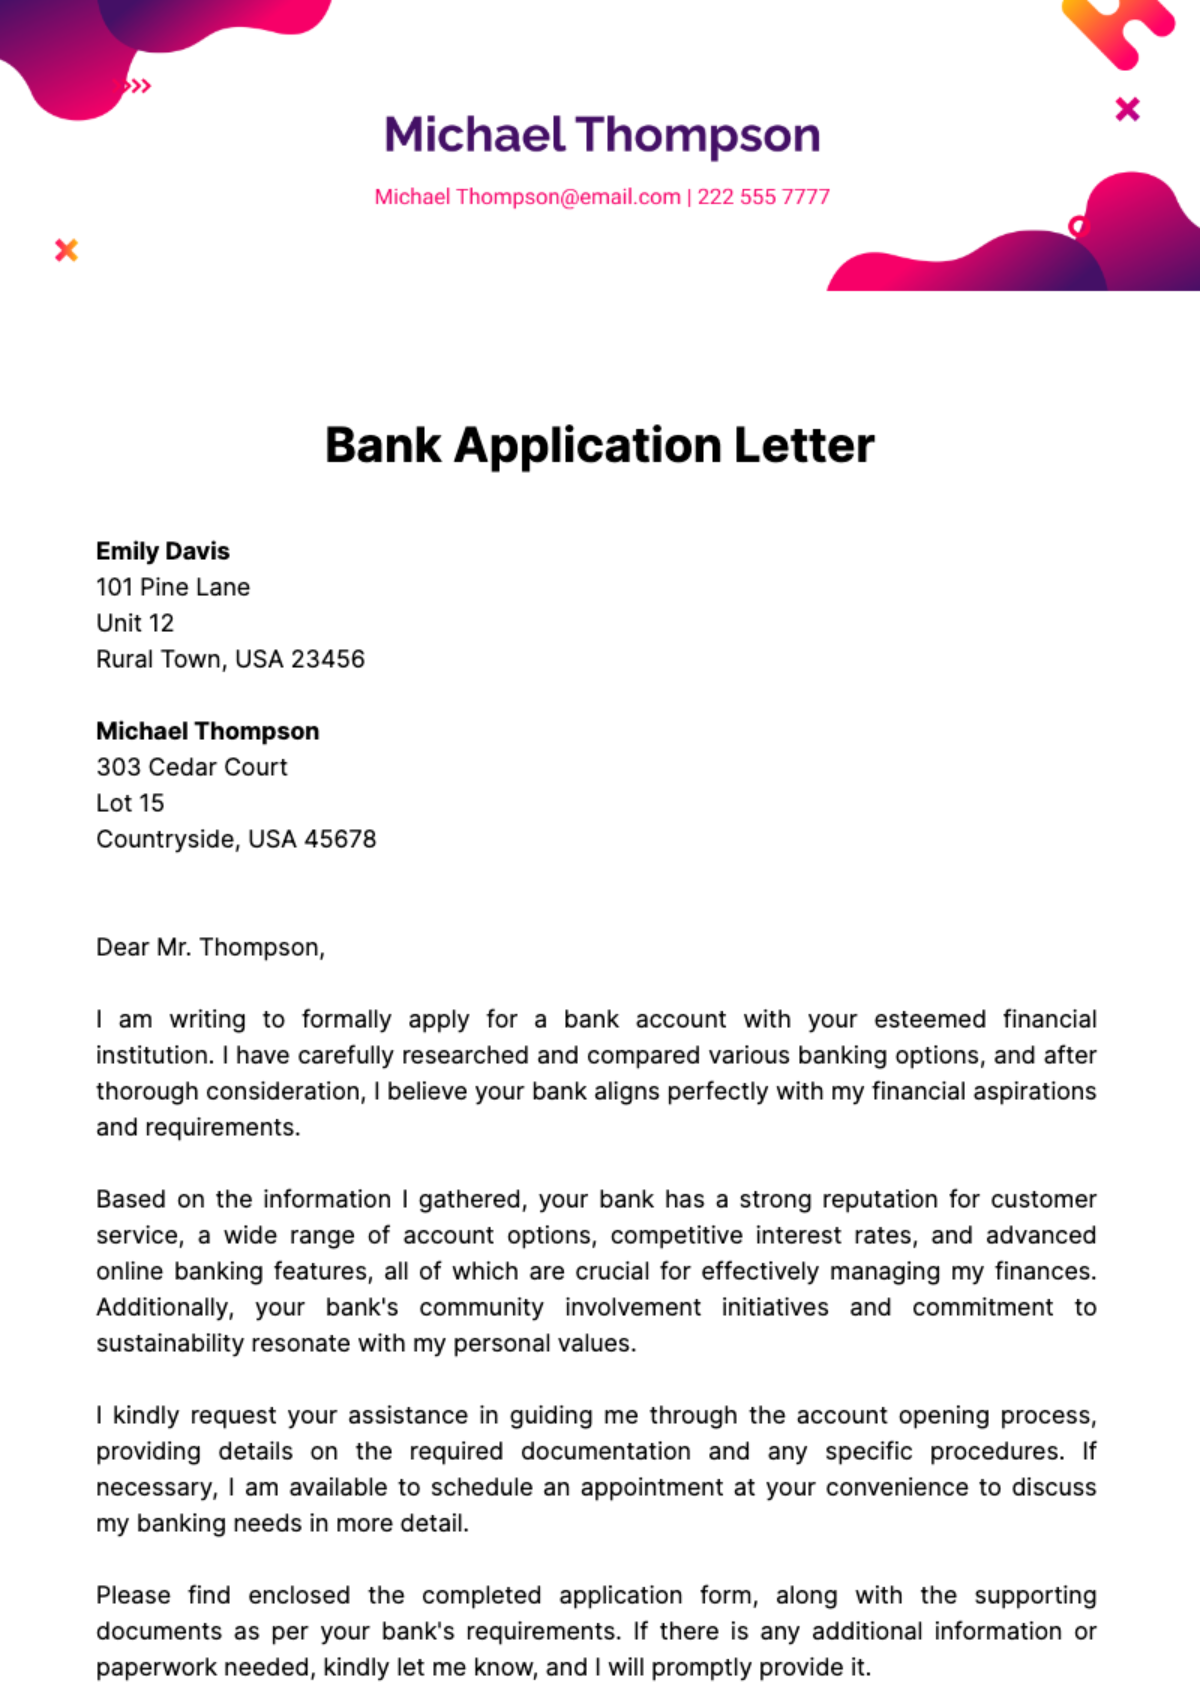 Bank Application Letter Template